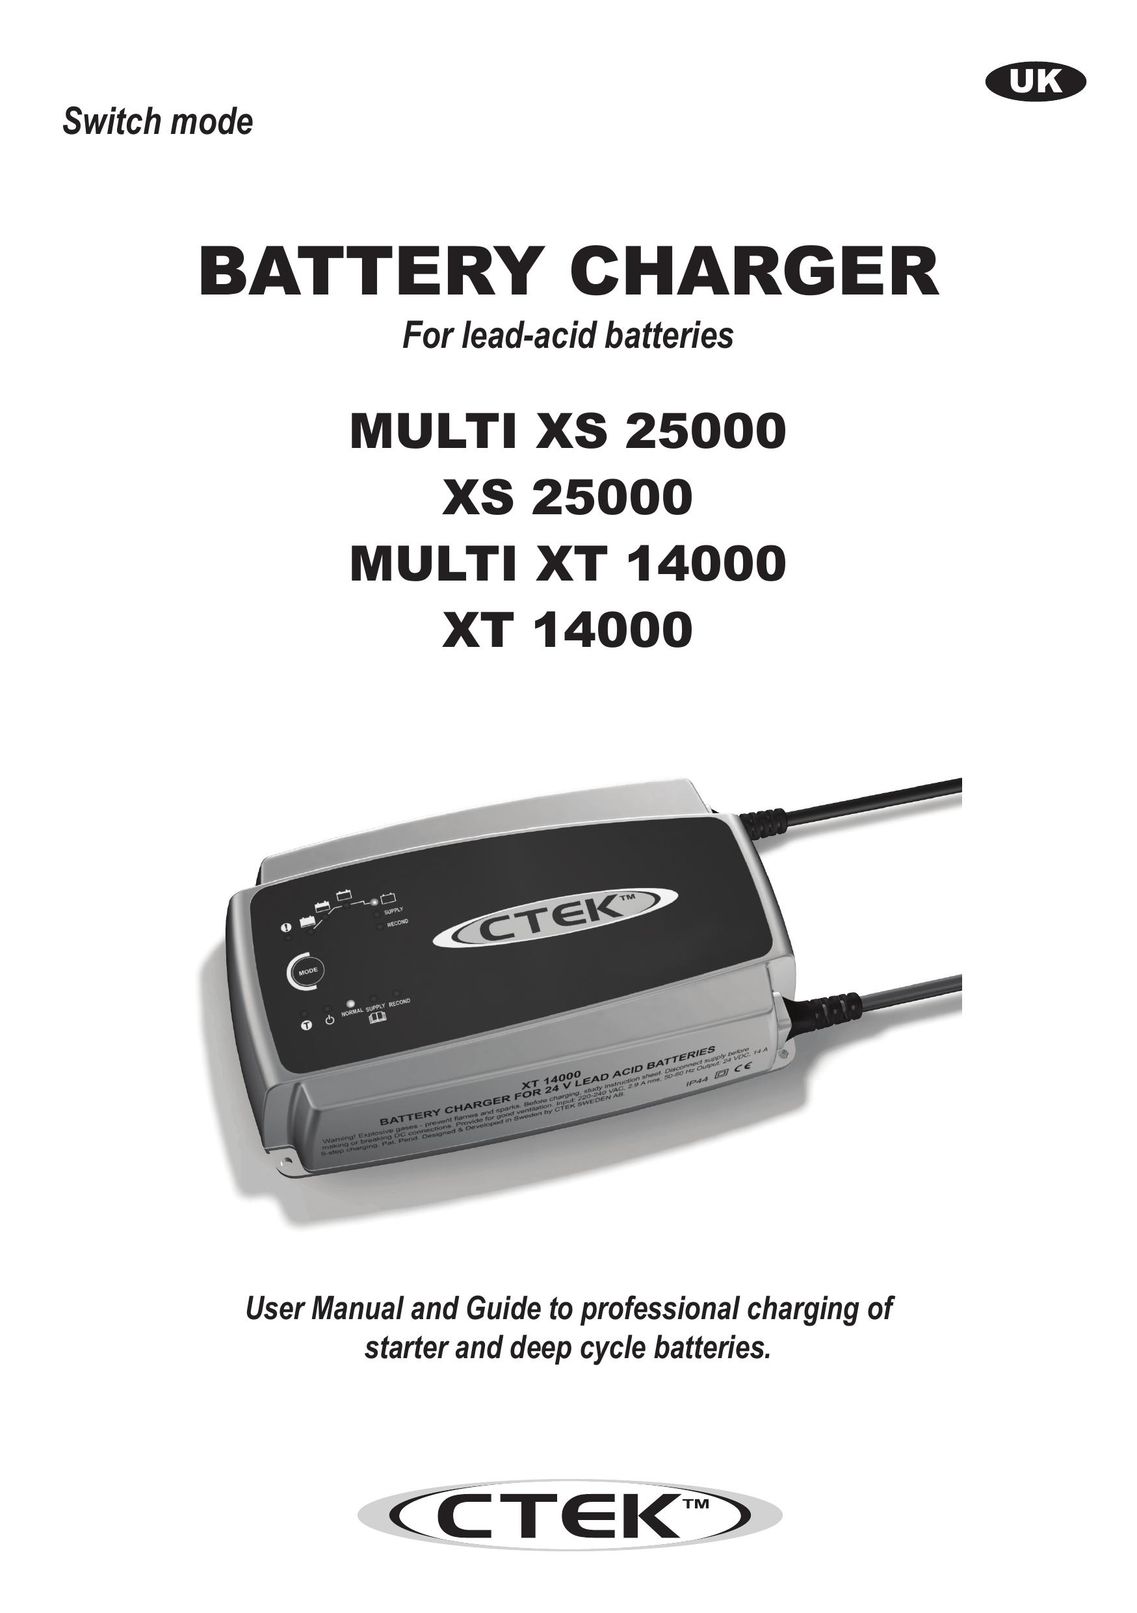 AB Soft XS 25000 Battery Charger User Manual